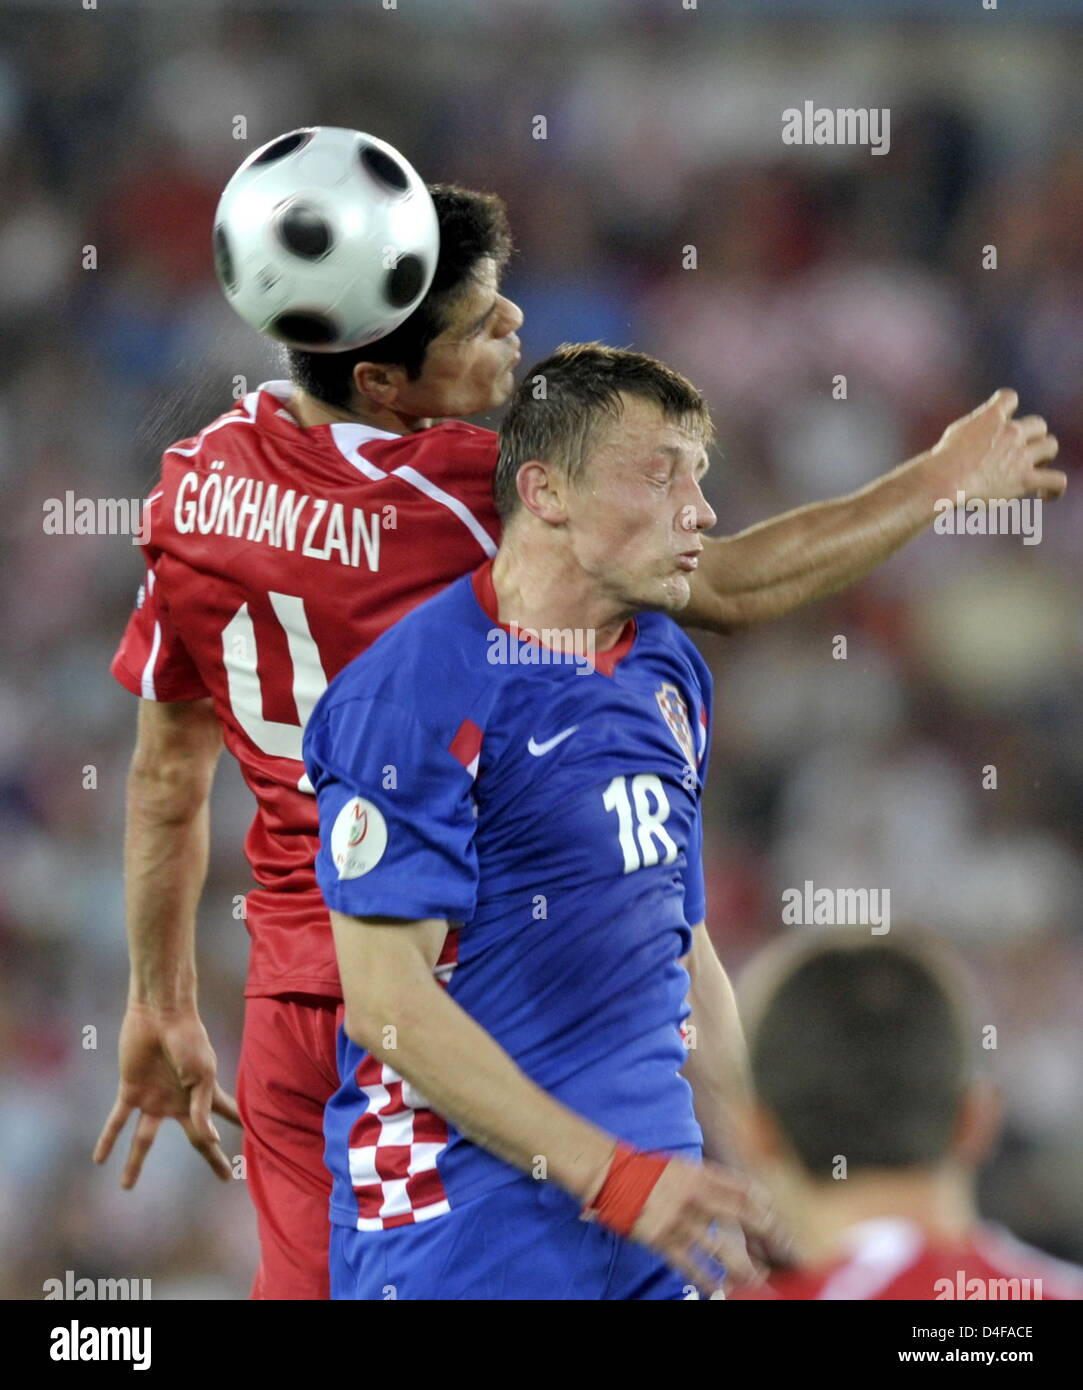 Ivica Olic(R) of Croatia vies with Gökahn Zan of Turkey during the UEFA EURO 2008 quarter final match between Croatia and Turkey at the Ernst Happel stadium in Vienna, Austria, 20 June 2008. Turkey won 3:1 in penalty shootout. Photo: Achim Scheidemann dpa +please note UEFA restrictions particulary in regard to slide shows and ÒNo Mobile ServicesÒ +++###dpa###+++ Stock Photo